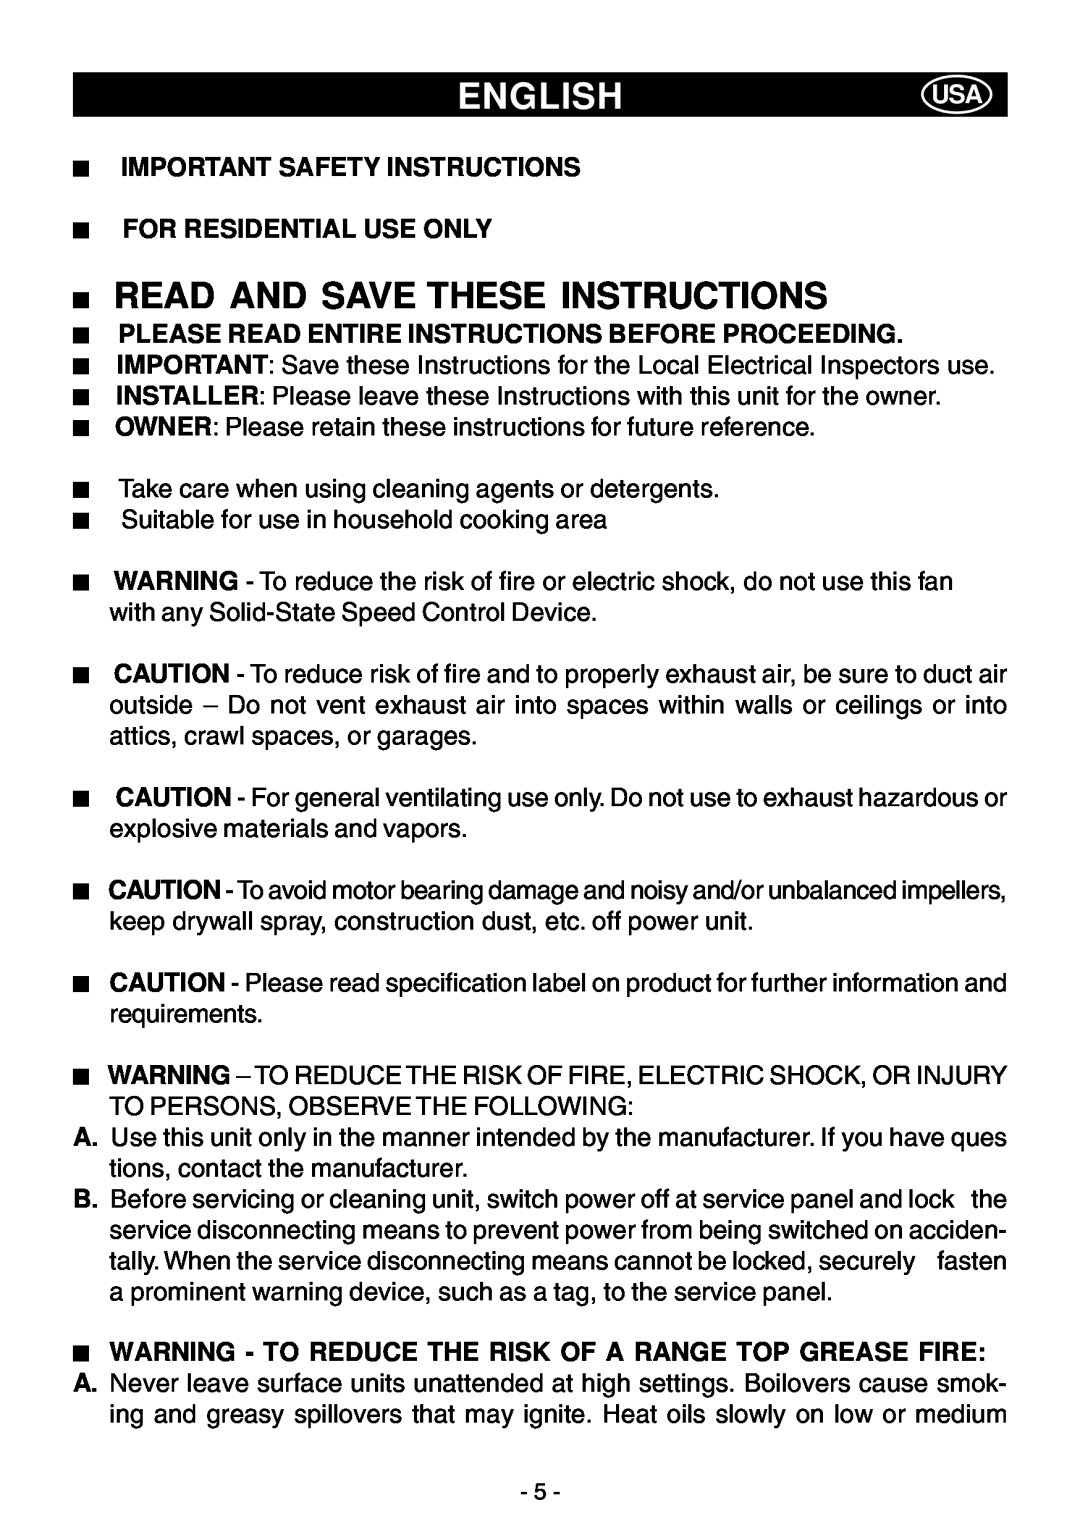 Elitair ZN-36 manual Englishusa, Read And Save These Instructions, Important Safety Instructions For Residential Use Only 